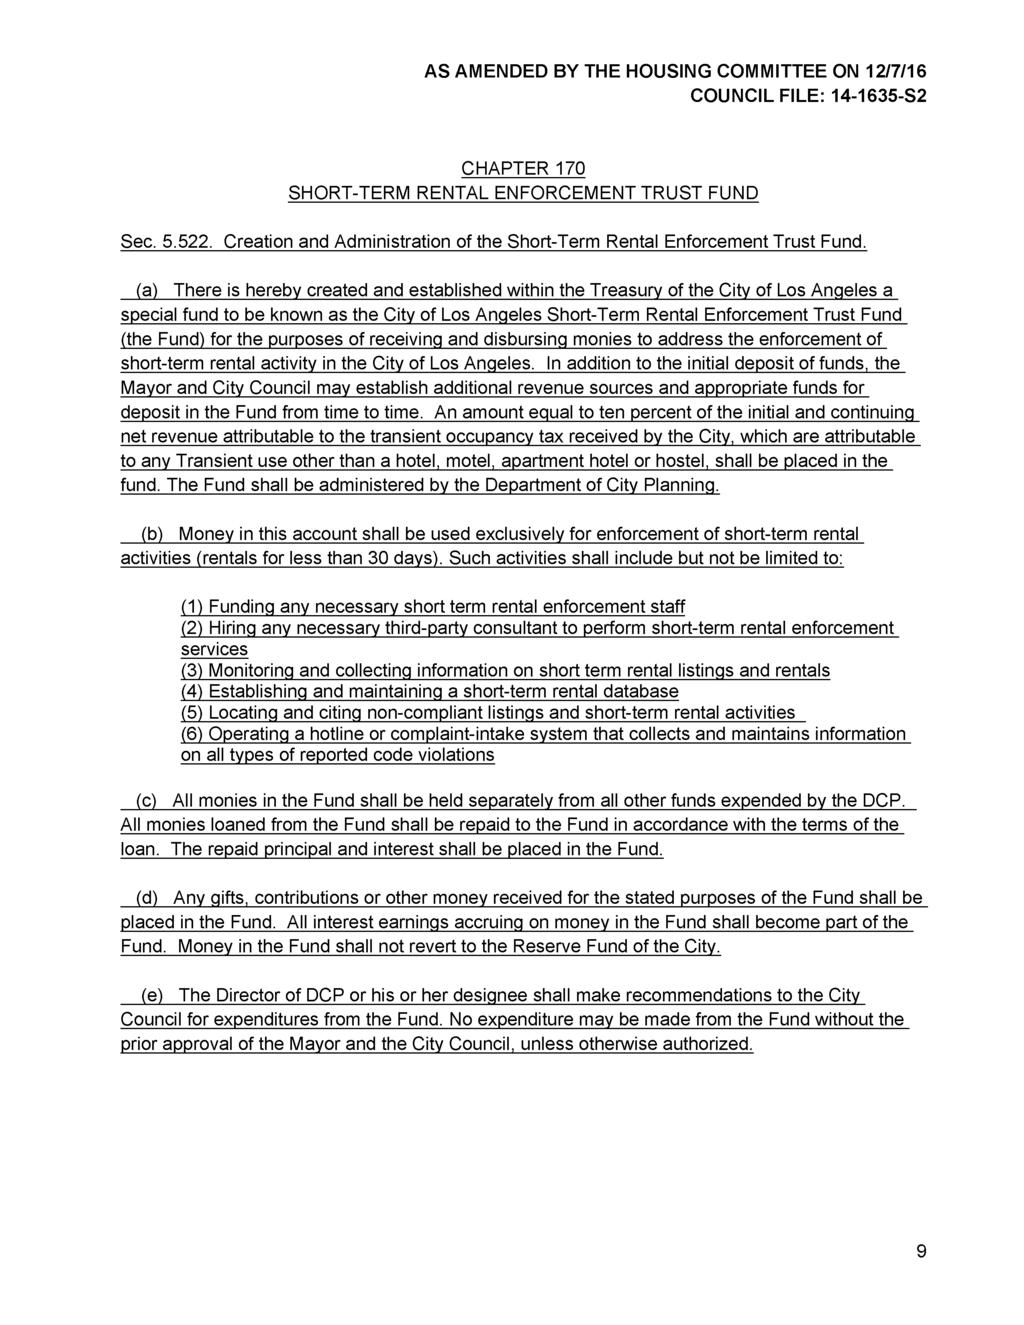 CHAPTER 170 SHORT-TERM RENTAL ENFORCEMENT TRUST FUND Sec. 5.522. Creation and Administration of the Short-Term Rental Enforcement Trust Fund.